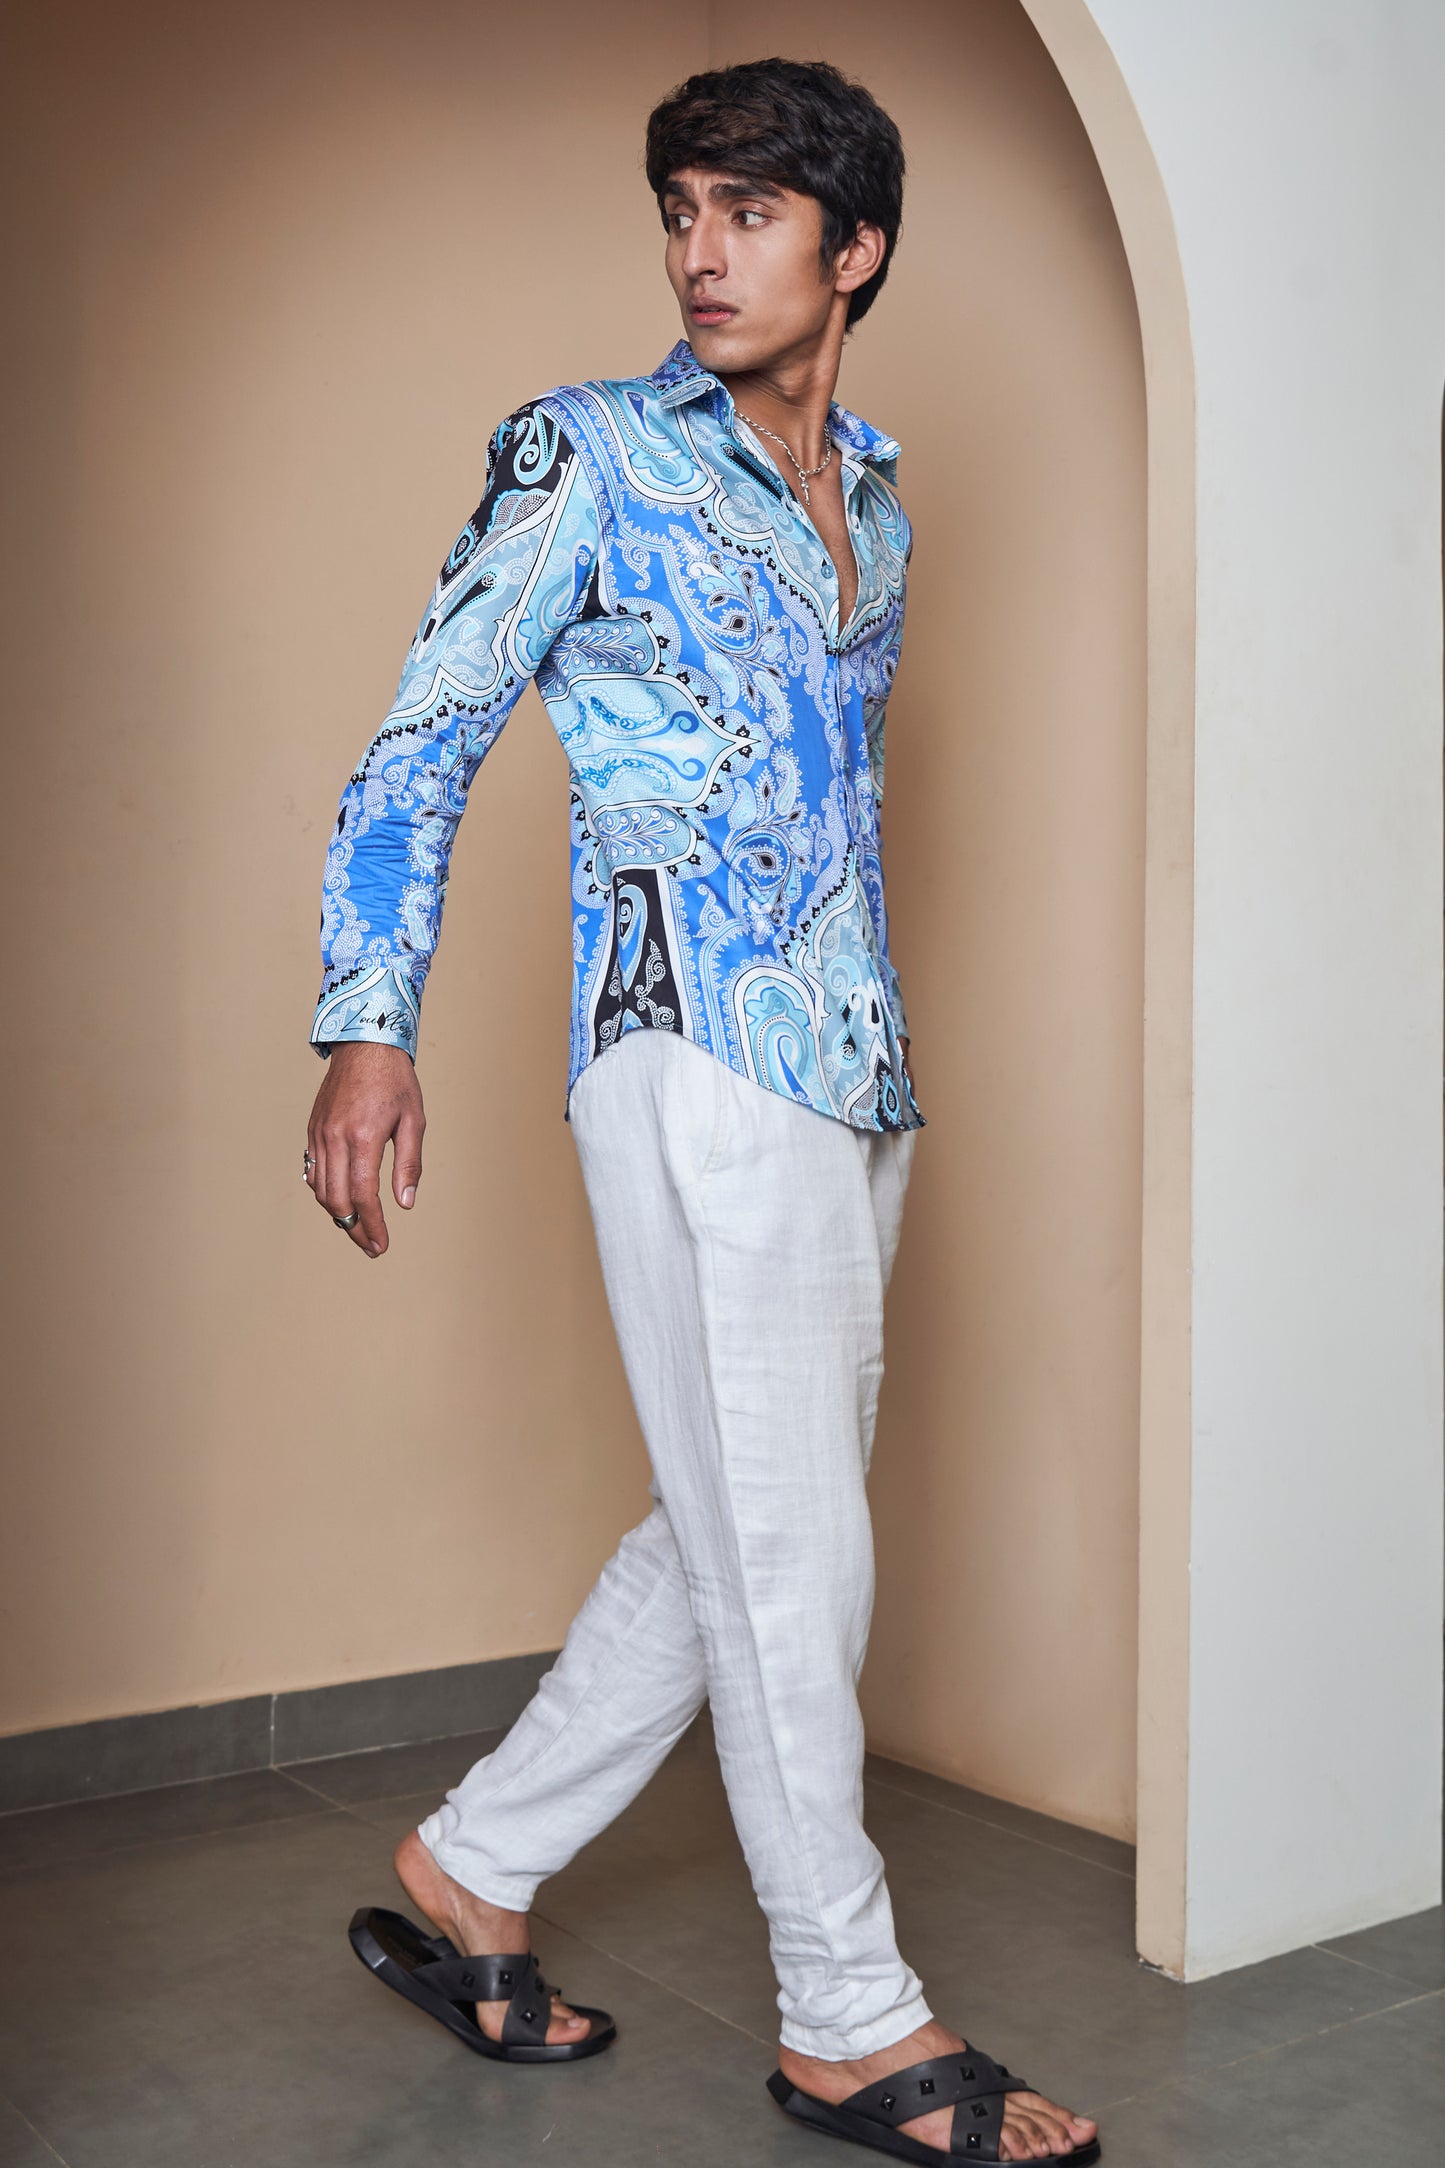 Model wearing the Blue Paisley Printed Cotton Shirt by LoudLess with shorts and sandals